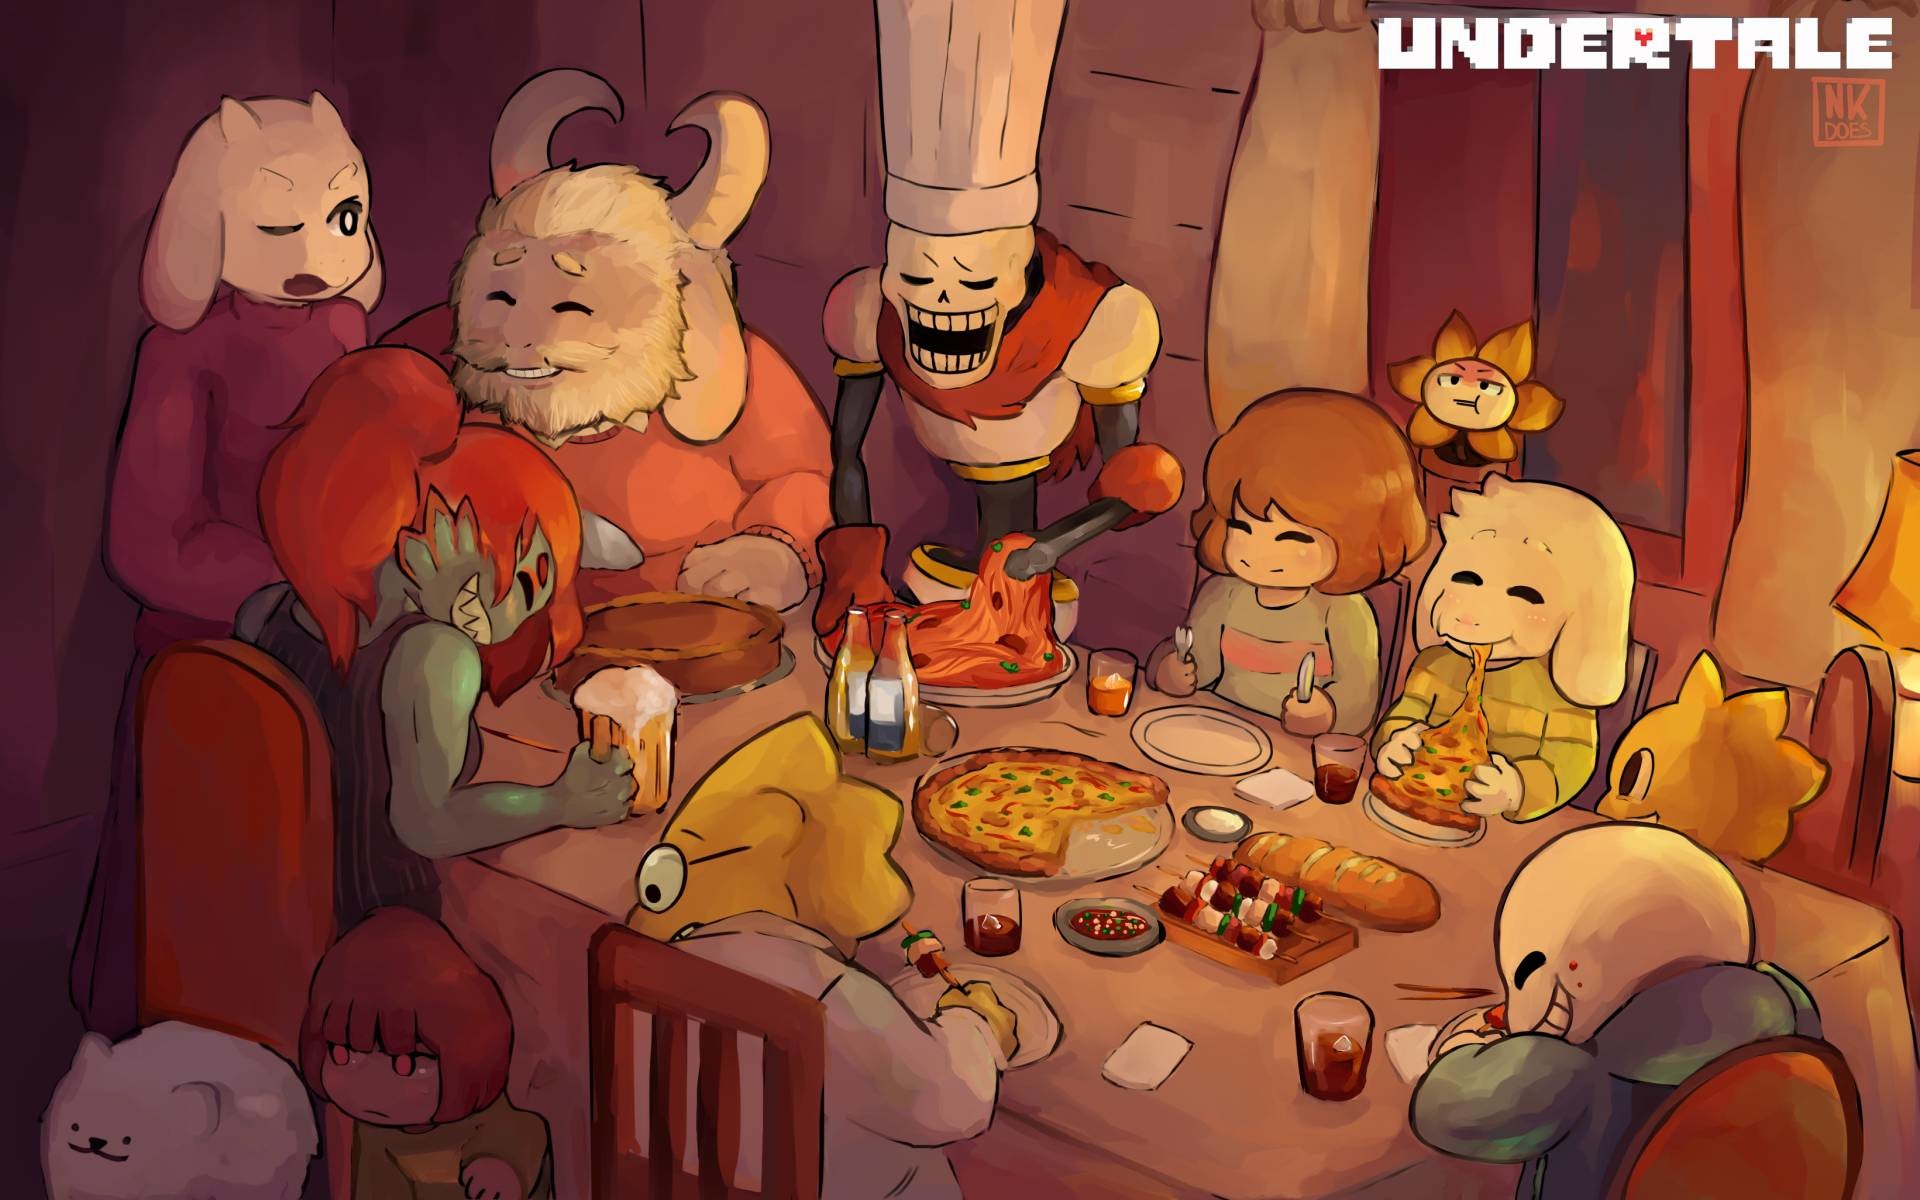 QWH688 Cute Undertale Wallpaper, Awesome Undertale Backgrounds